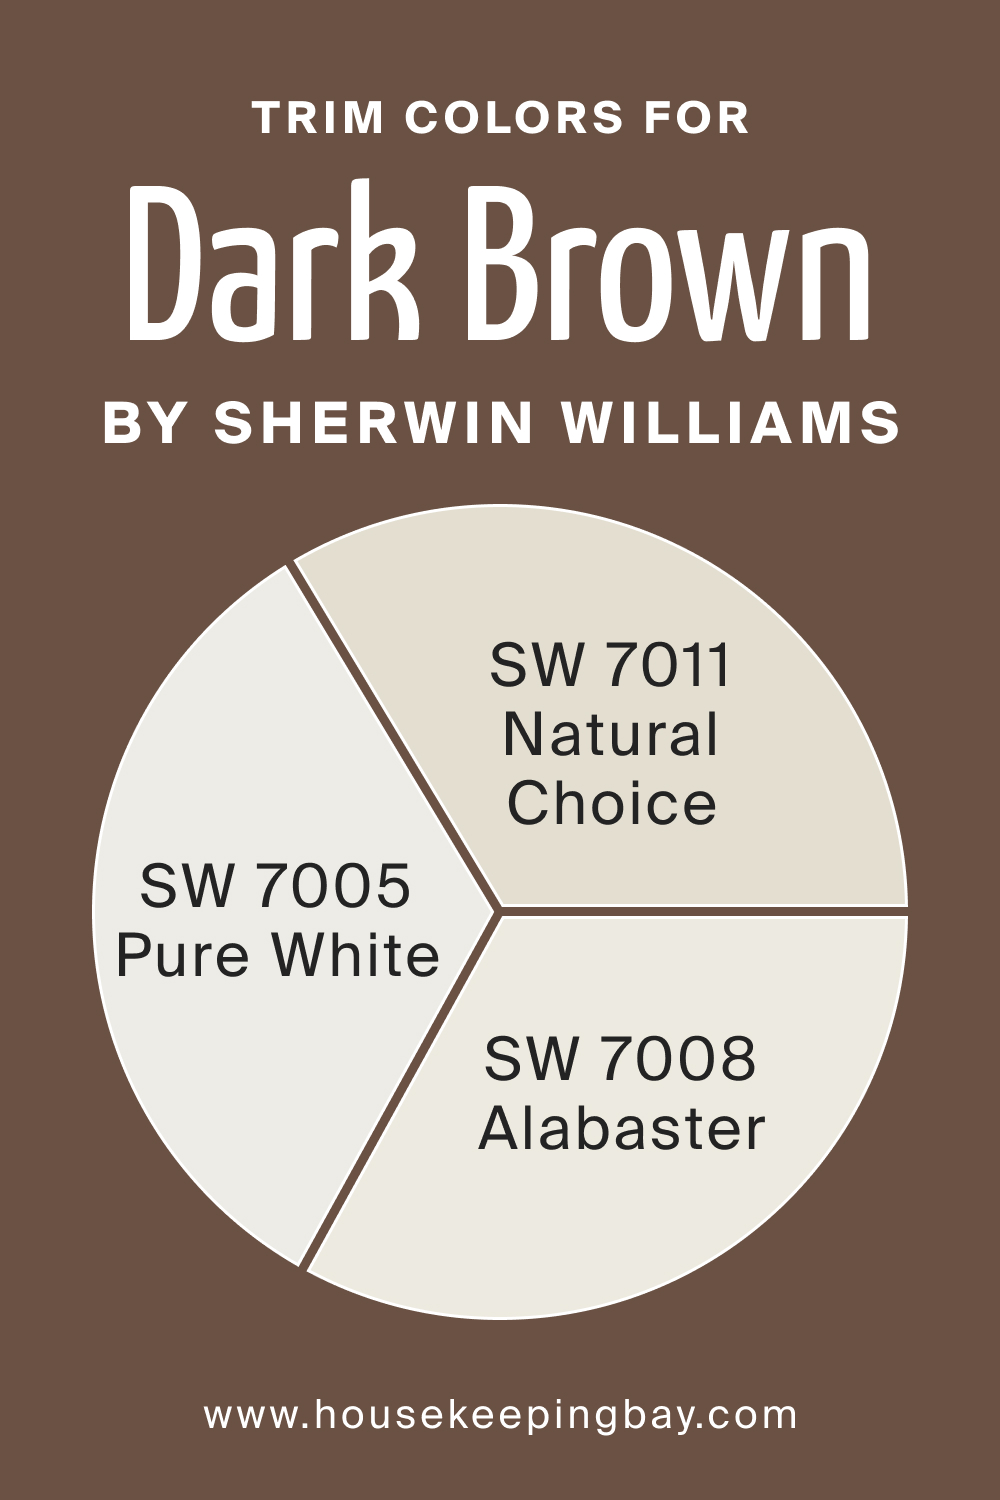 Trim Colors of SW 7520 Dark Brown by Sherwin Williams